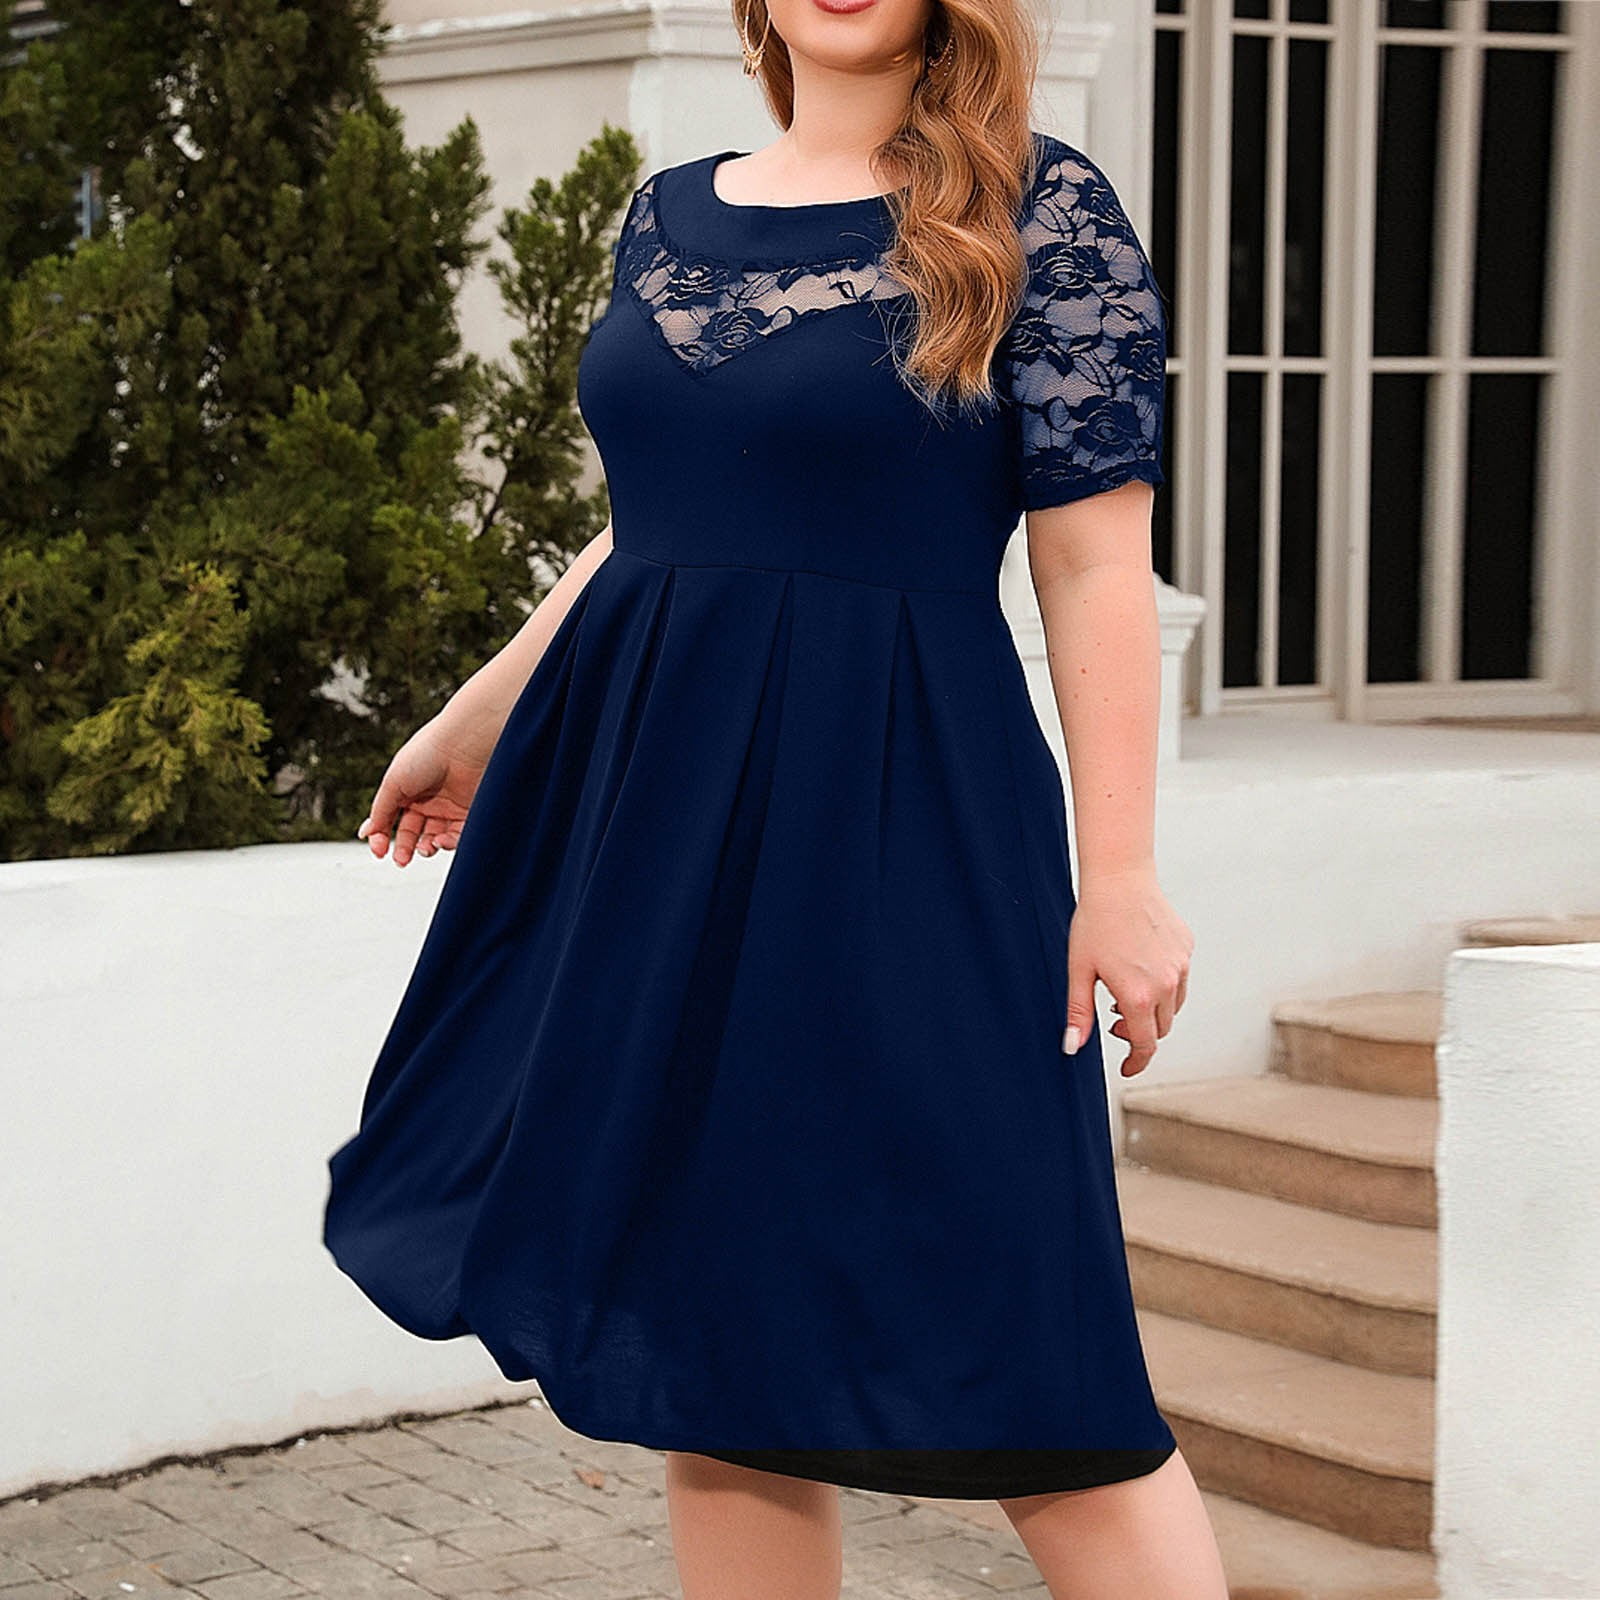 YWDJ Wedding Dresses for Bride Semi Formal Dresses Summer Plus Size Casual Lace Sleeve Oversize Round Neck Solid Sleeve Loose for Wedding Guest Evening Graduation Birthday Party Tea Party -